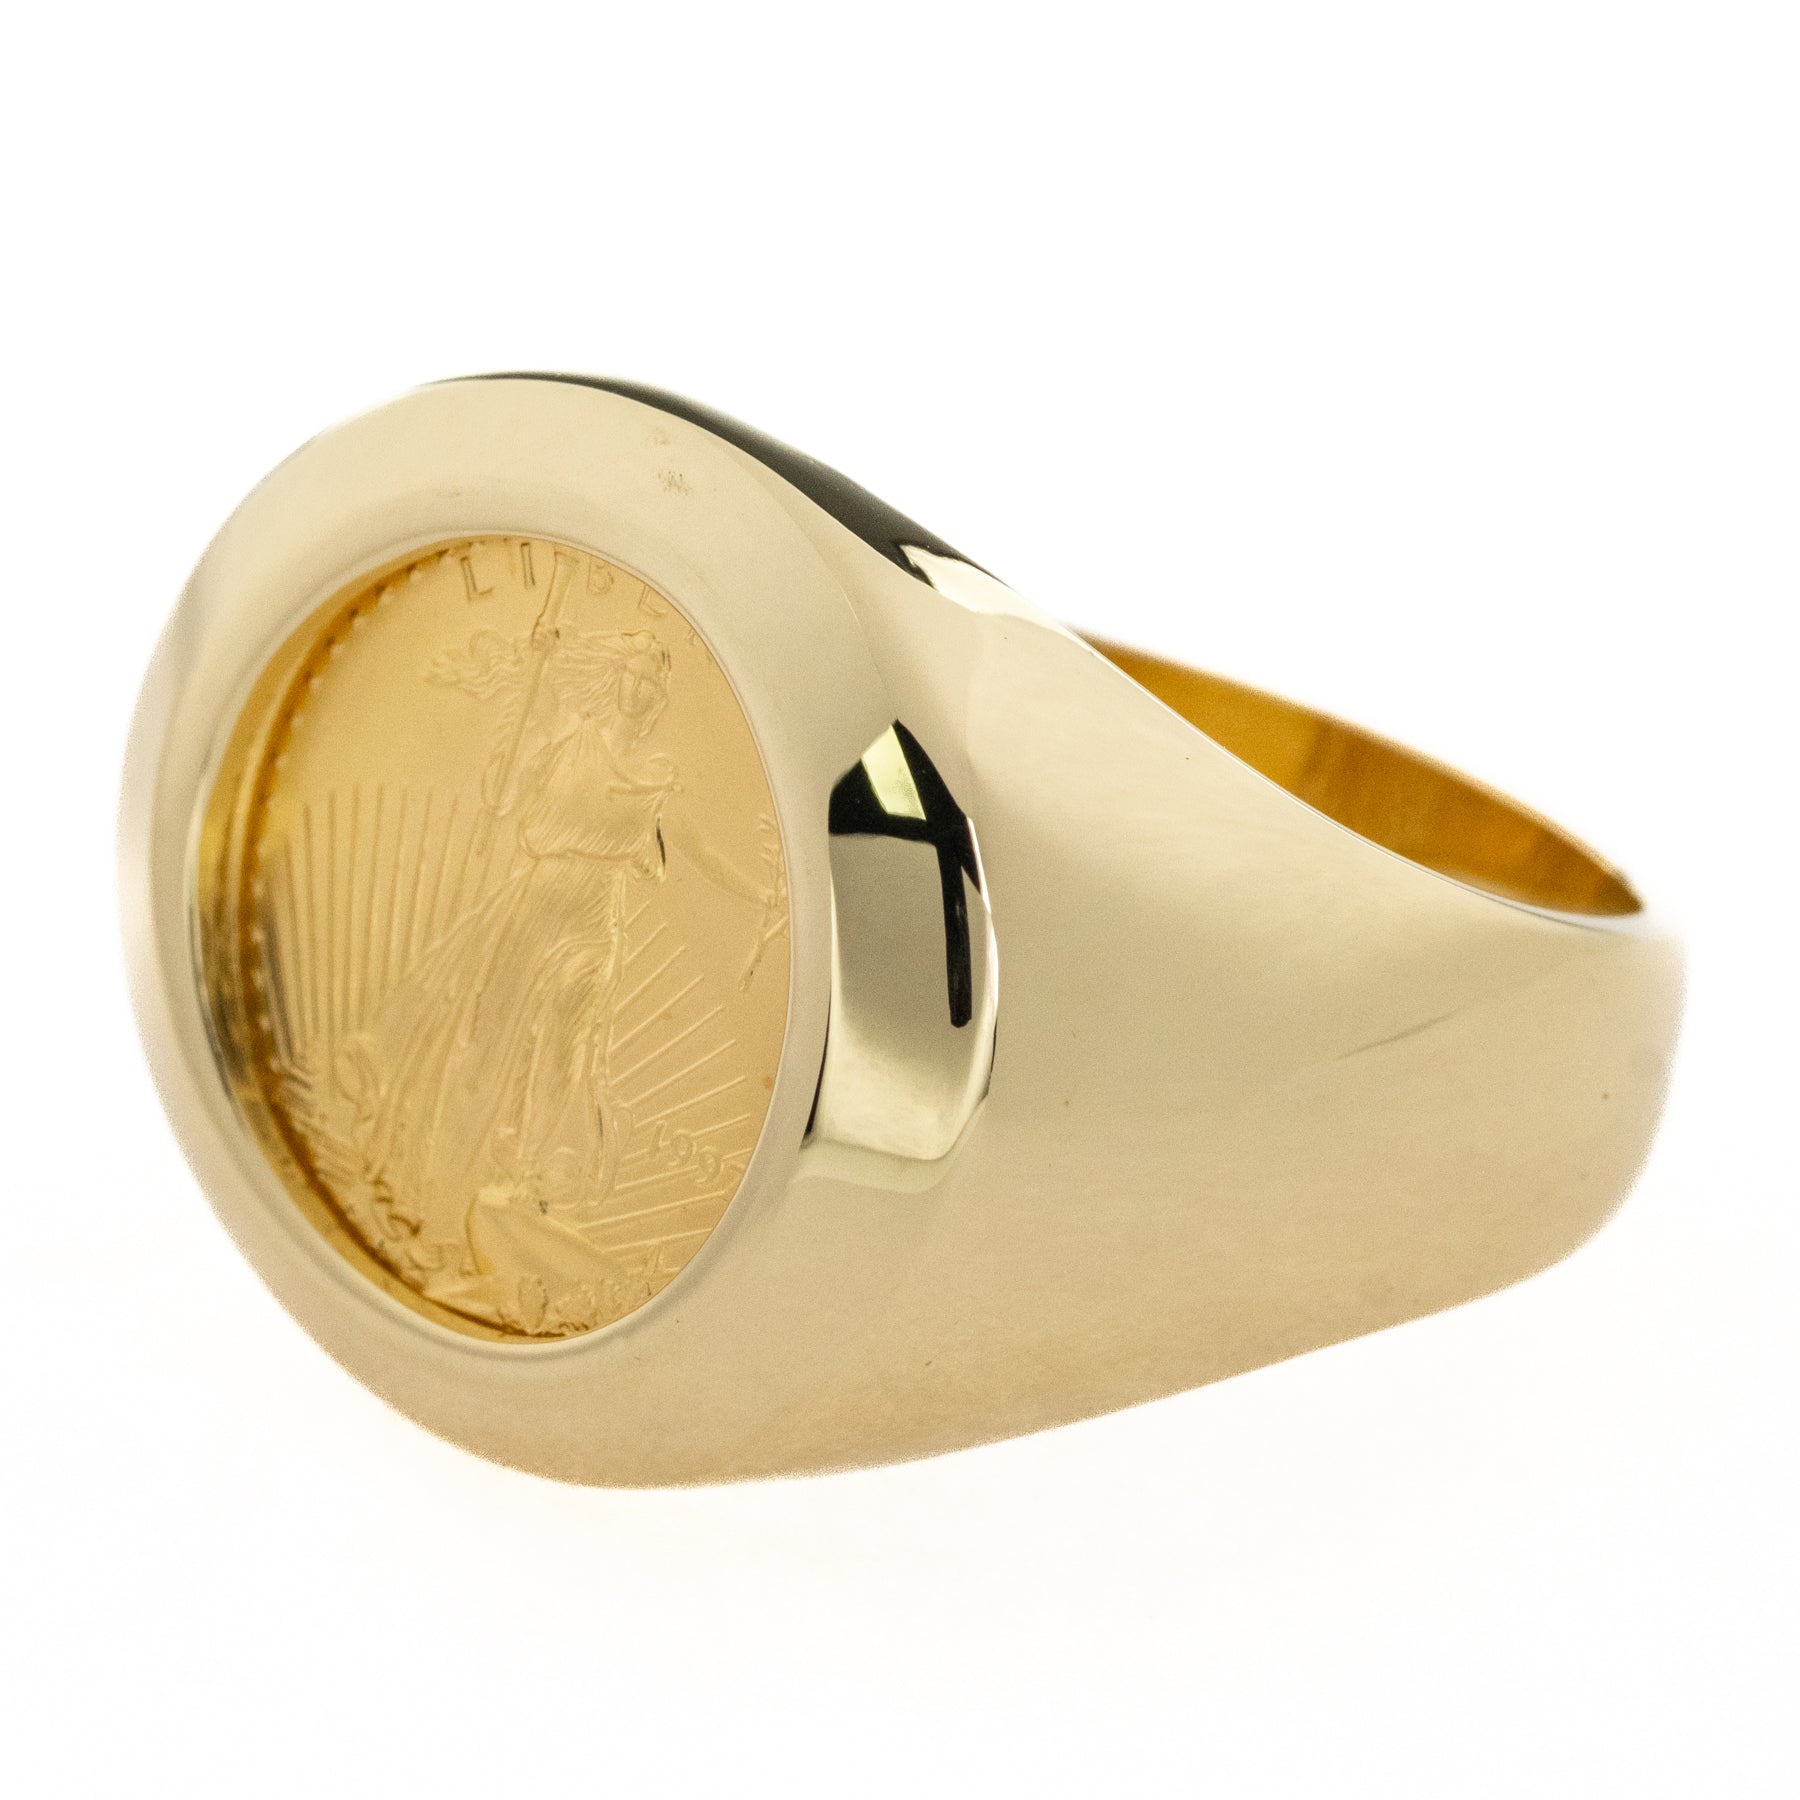 U.S. Half Eagle Liberty gold coin and diamond 14k ring — Vintage Jewelers &  Gifts, LLC.